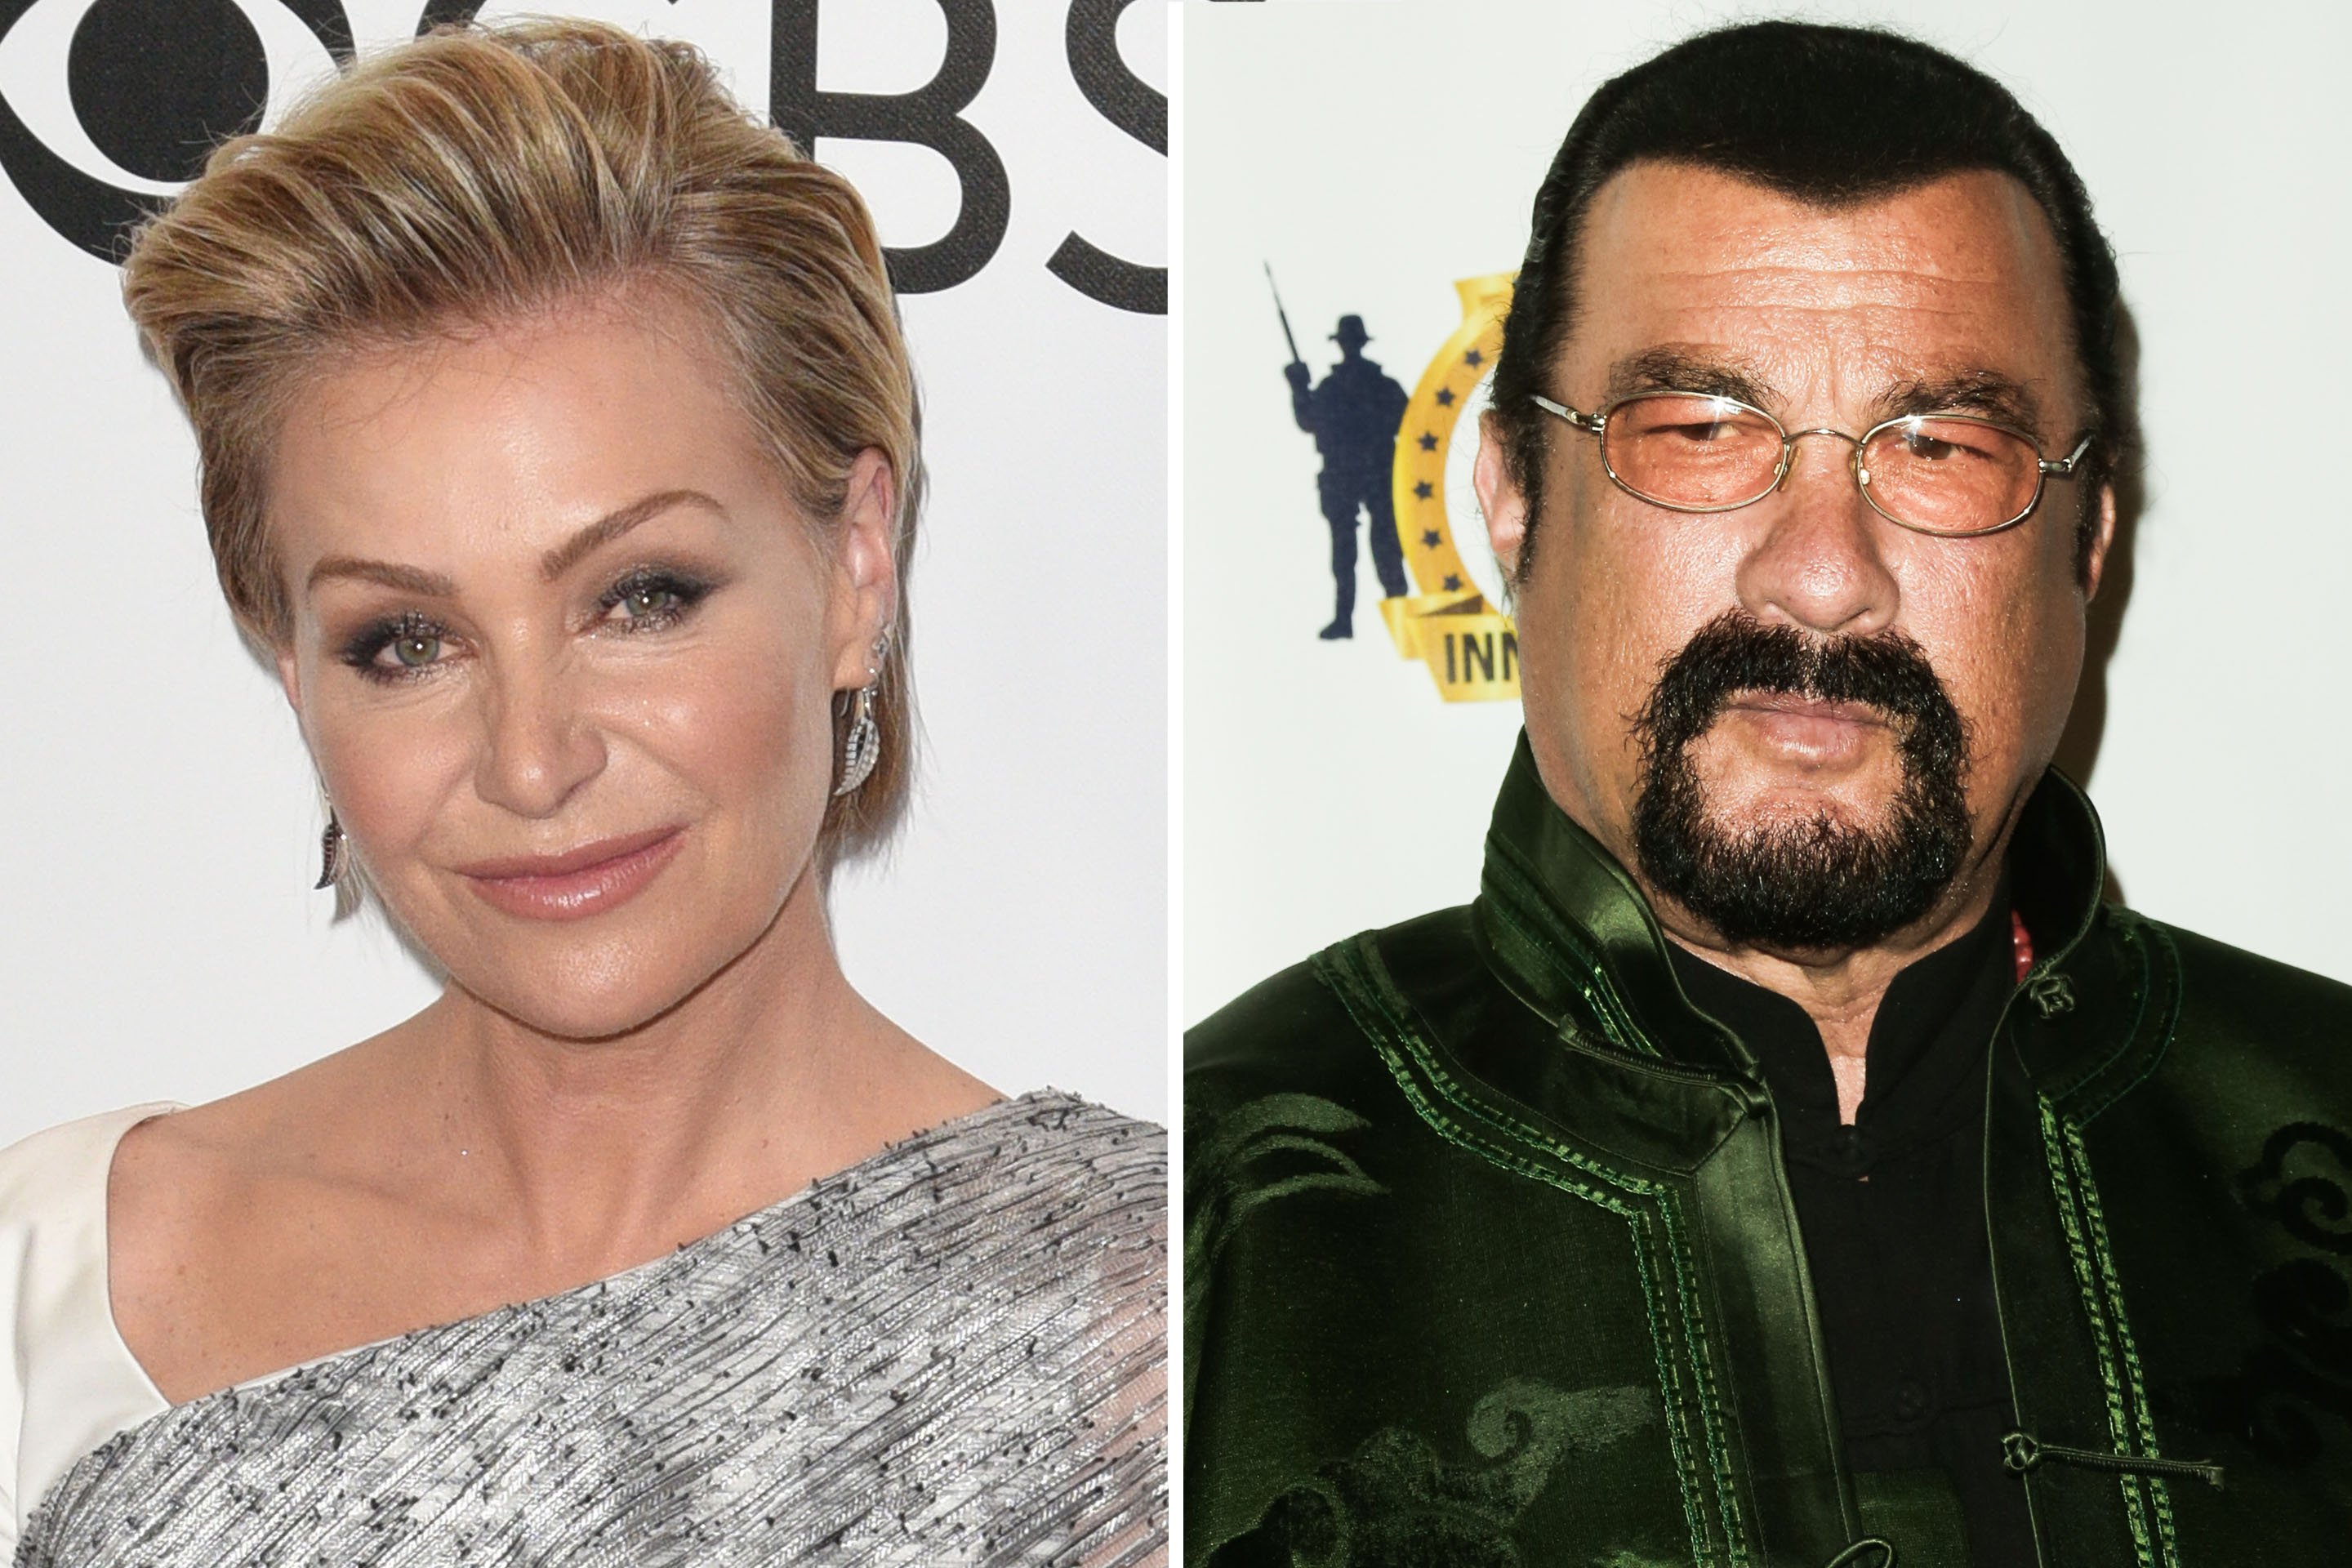 Actress Portia de Rossi claims Steven Seagal unzipped his pants in front of her during an audition. (Getty Images)